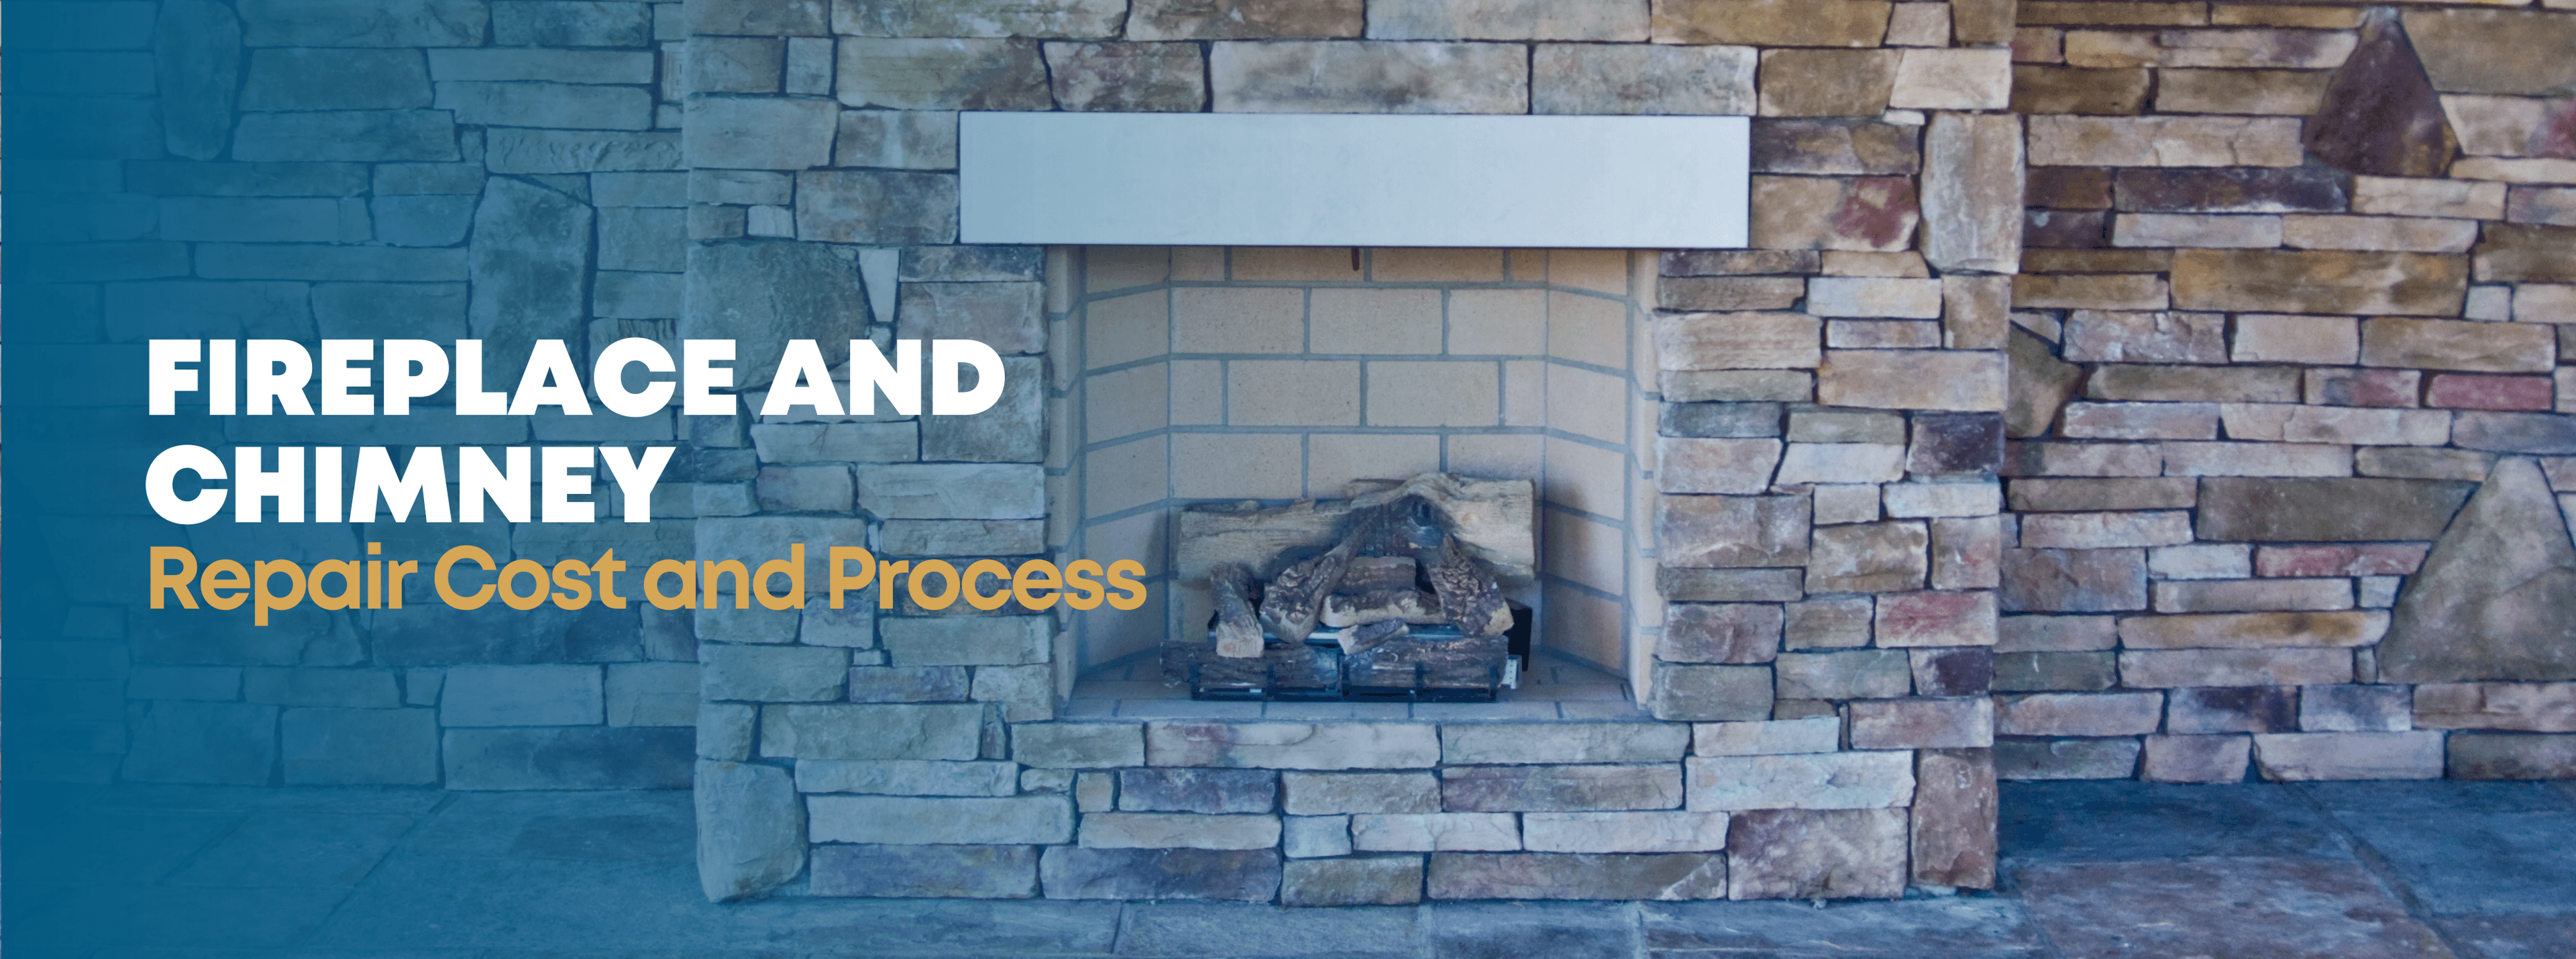 Fireplace and Chimney: Repair Cost and Process 